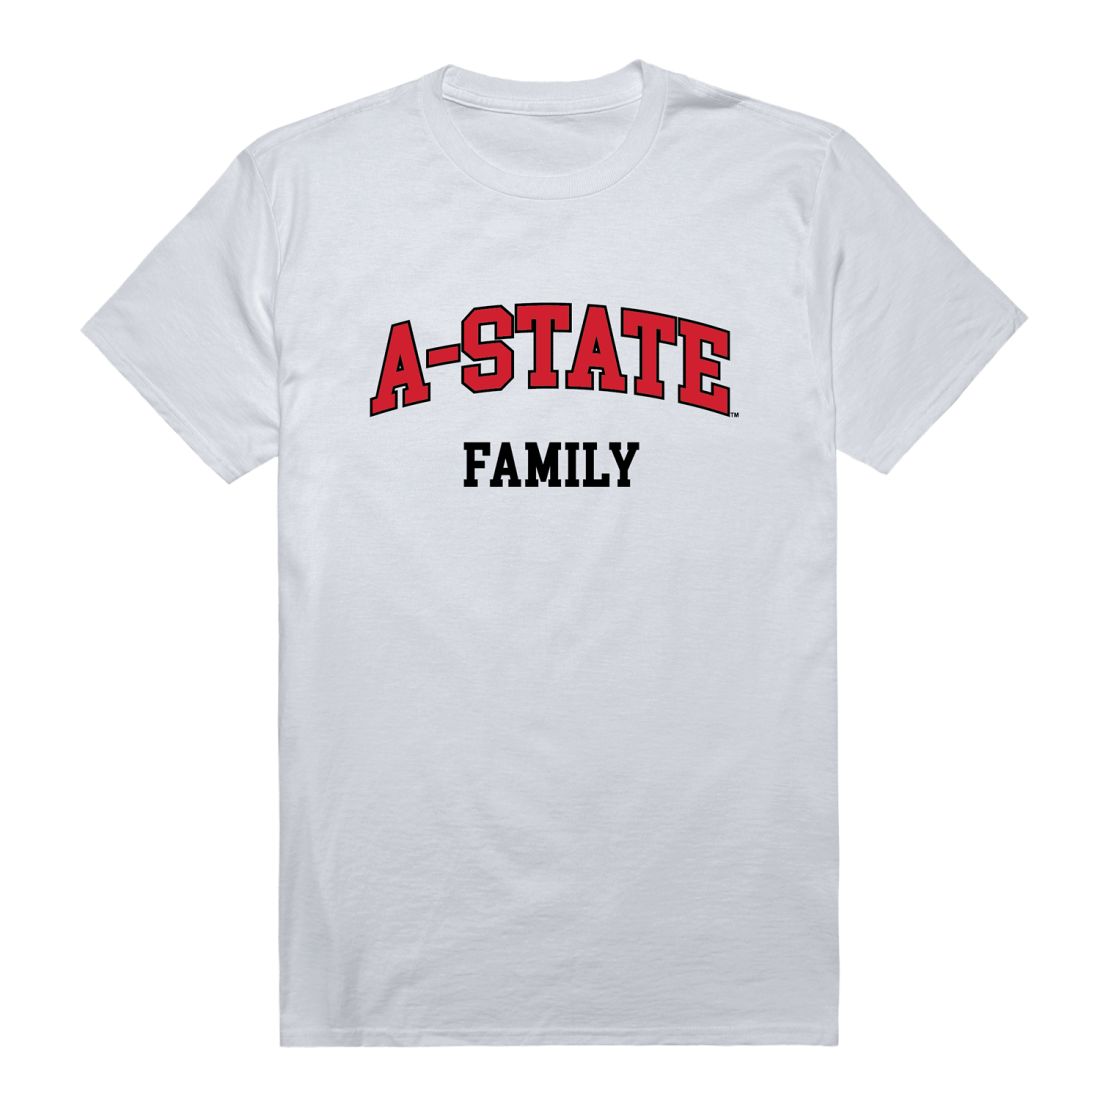 Arkansas State University A-State Red Wolves Family T-Shirt